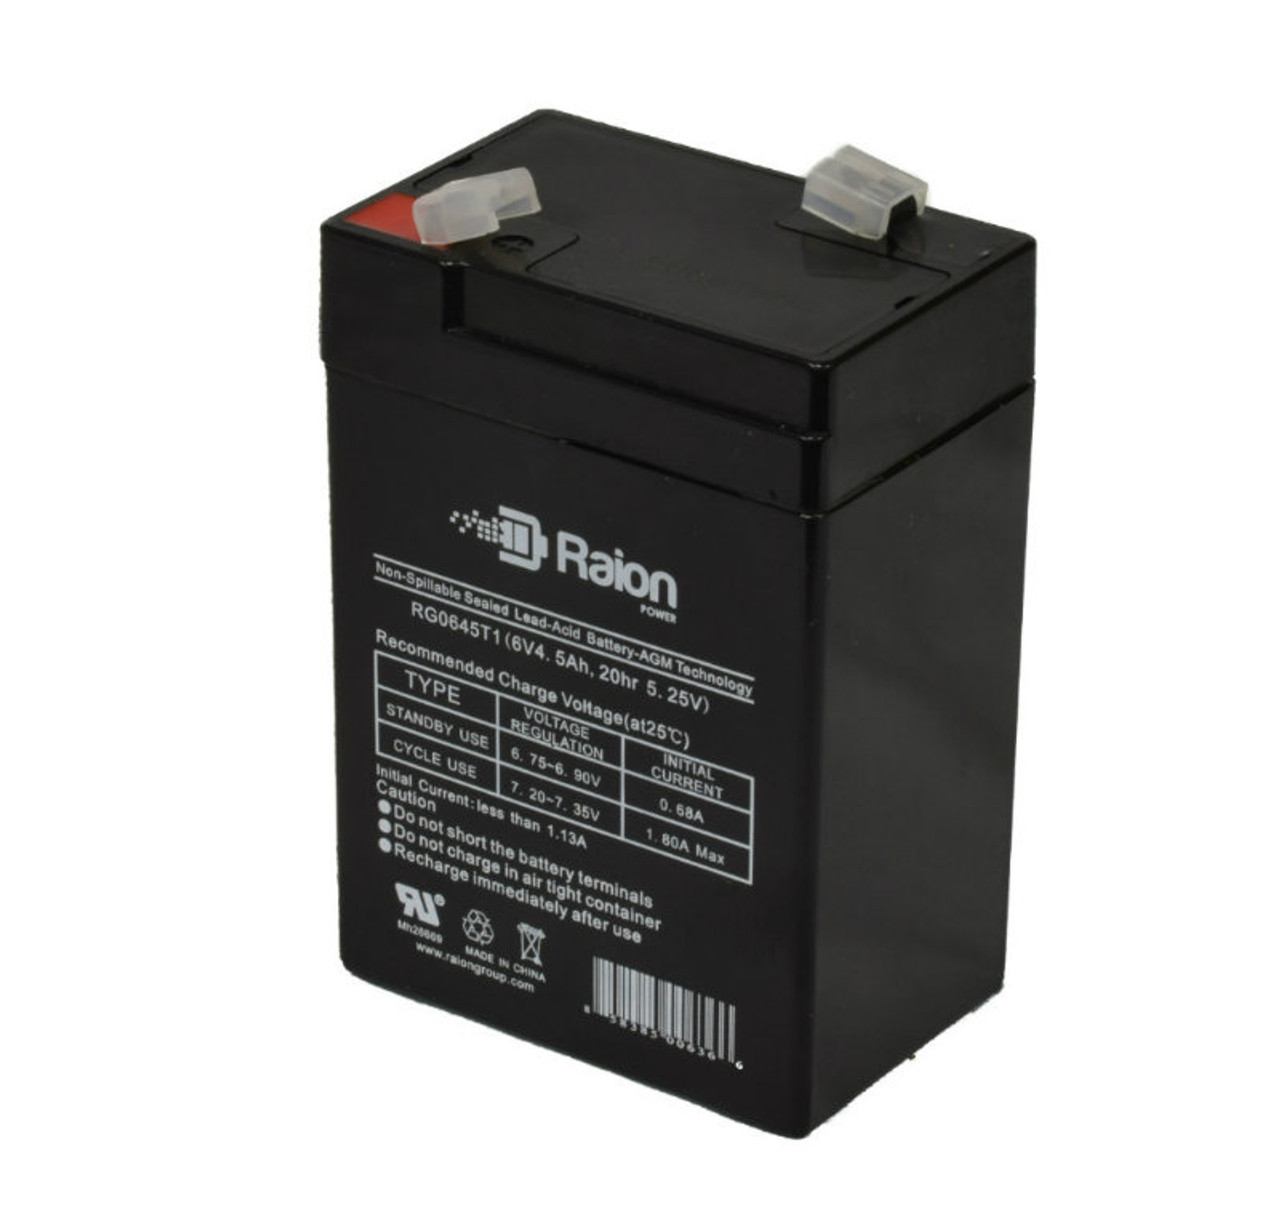 Raion Power RG0645T1 6V 4.5Ah Replacement Battery Cartridge for LCB SP4-6